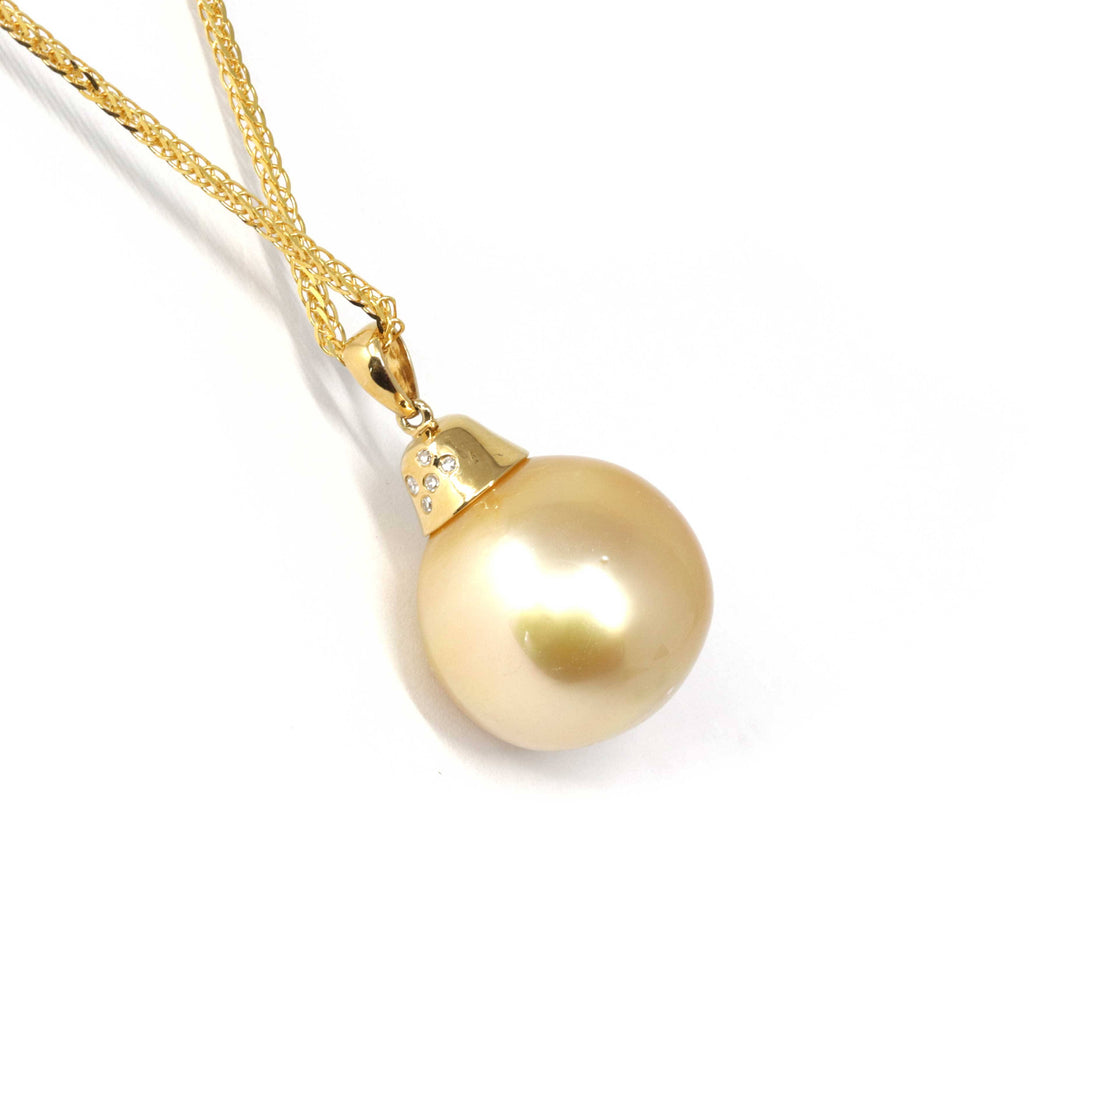 Baikalla Jewelry Gold Pearl Necklace 18k Gold Round Golden South Sea Cultured Pearl & Diamond Pendant Necklace for Women, AAA Quality